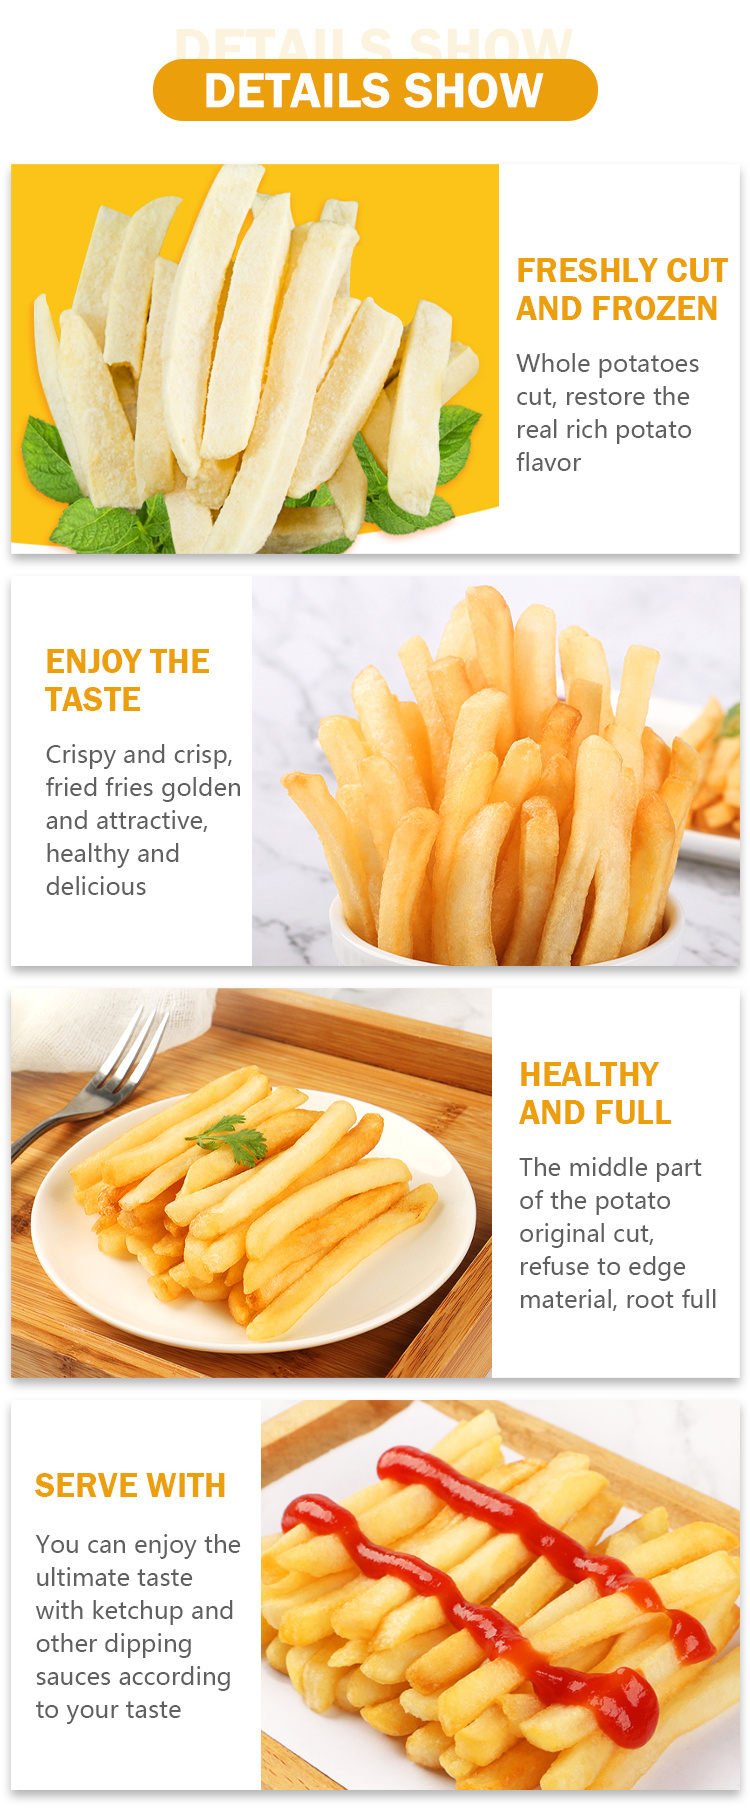 Flavored French Fries Thick French Fries Wholesale IQF Frozen French Fries